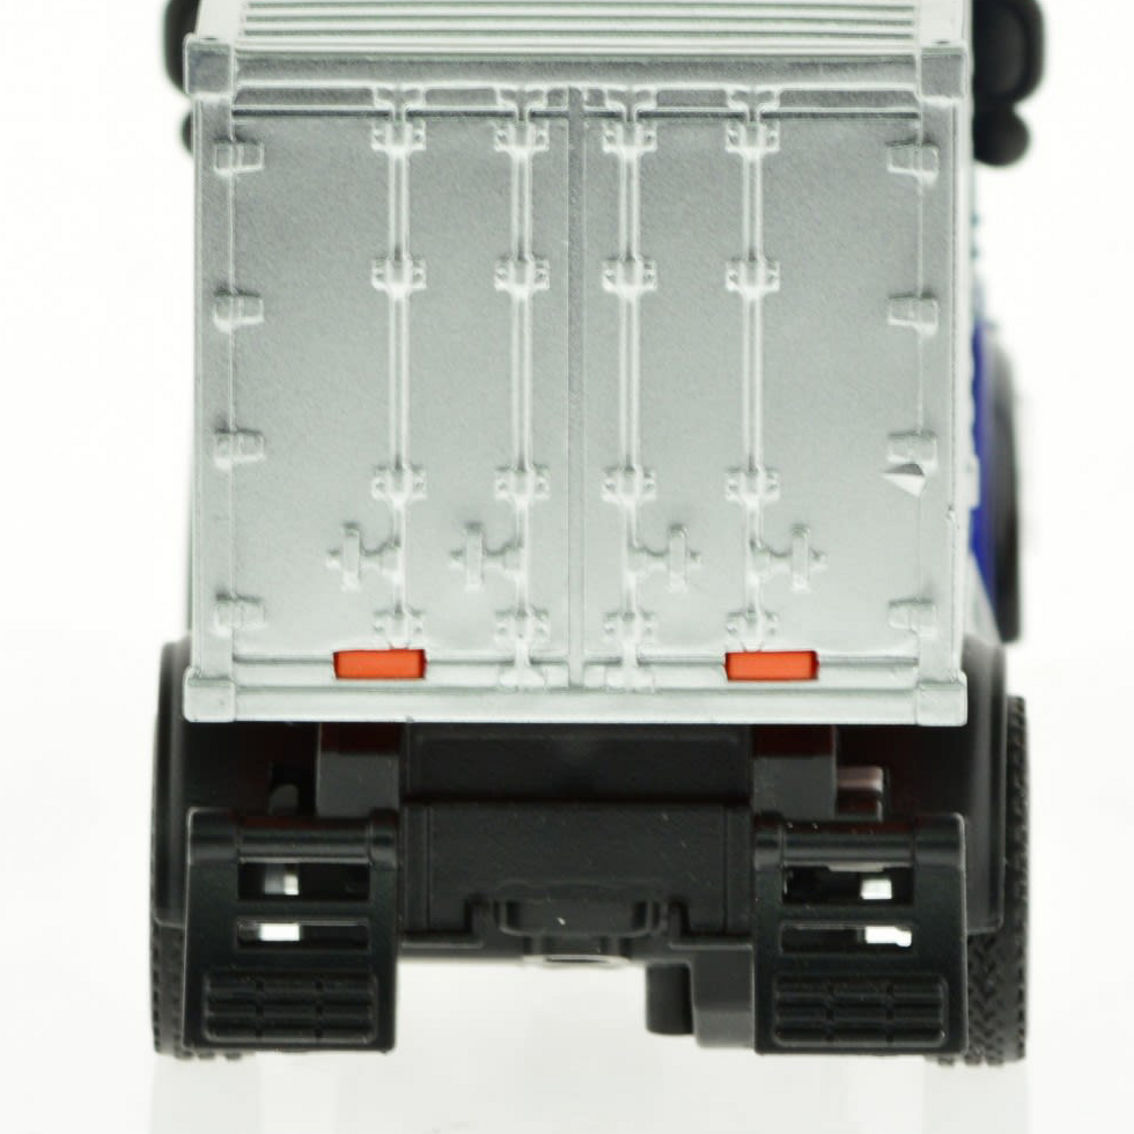 CIS-AG56162B2 2.4G 1:64 RC Transportation container Truck with lights and sound - Image 5 of 5